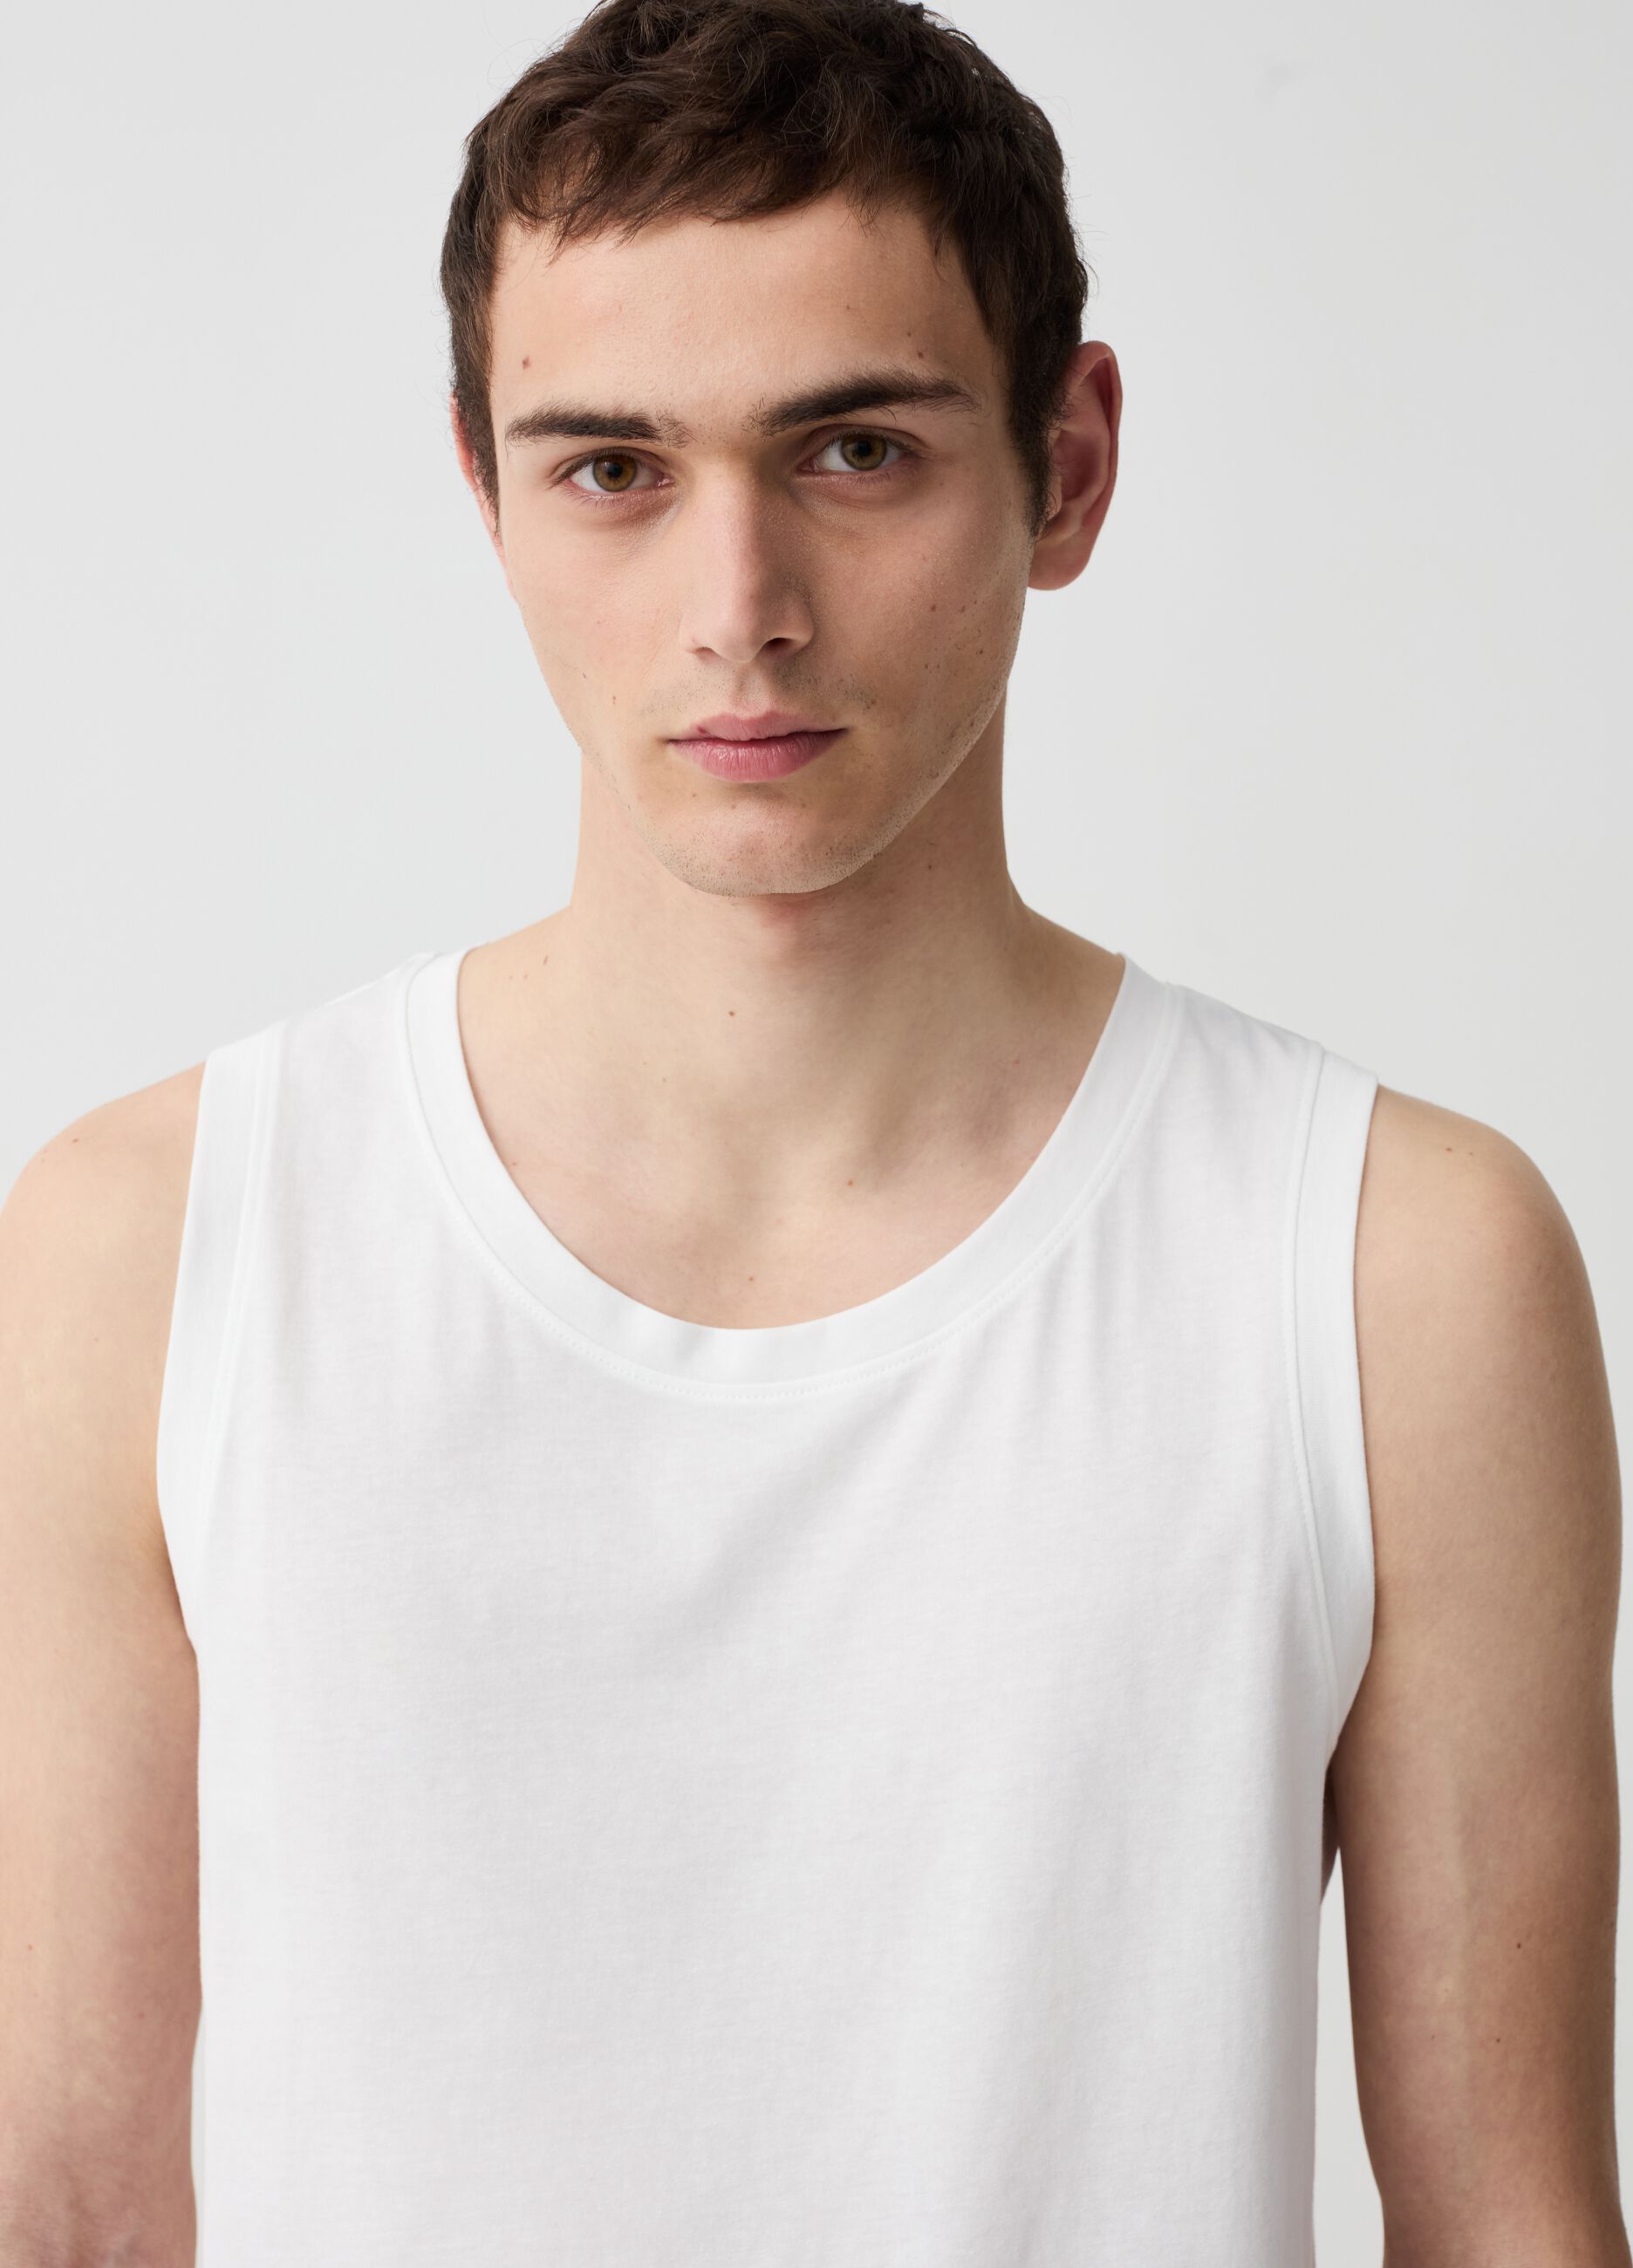 Cotton tank top with round neck